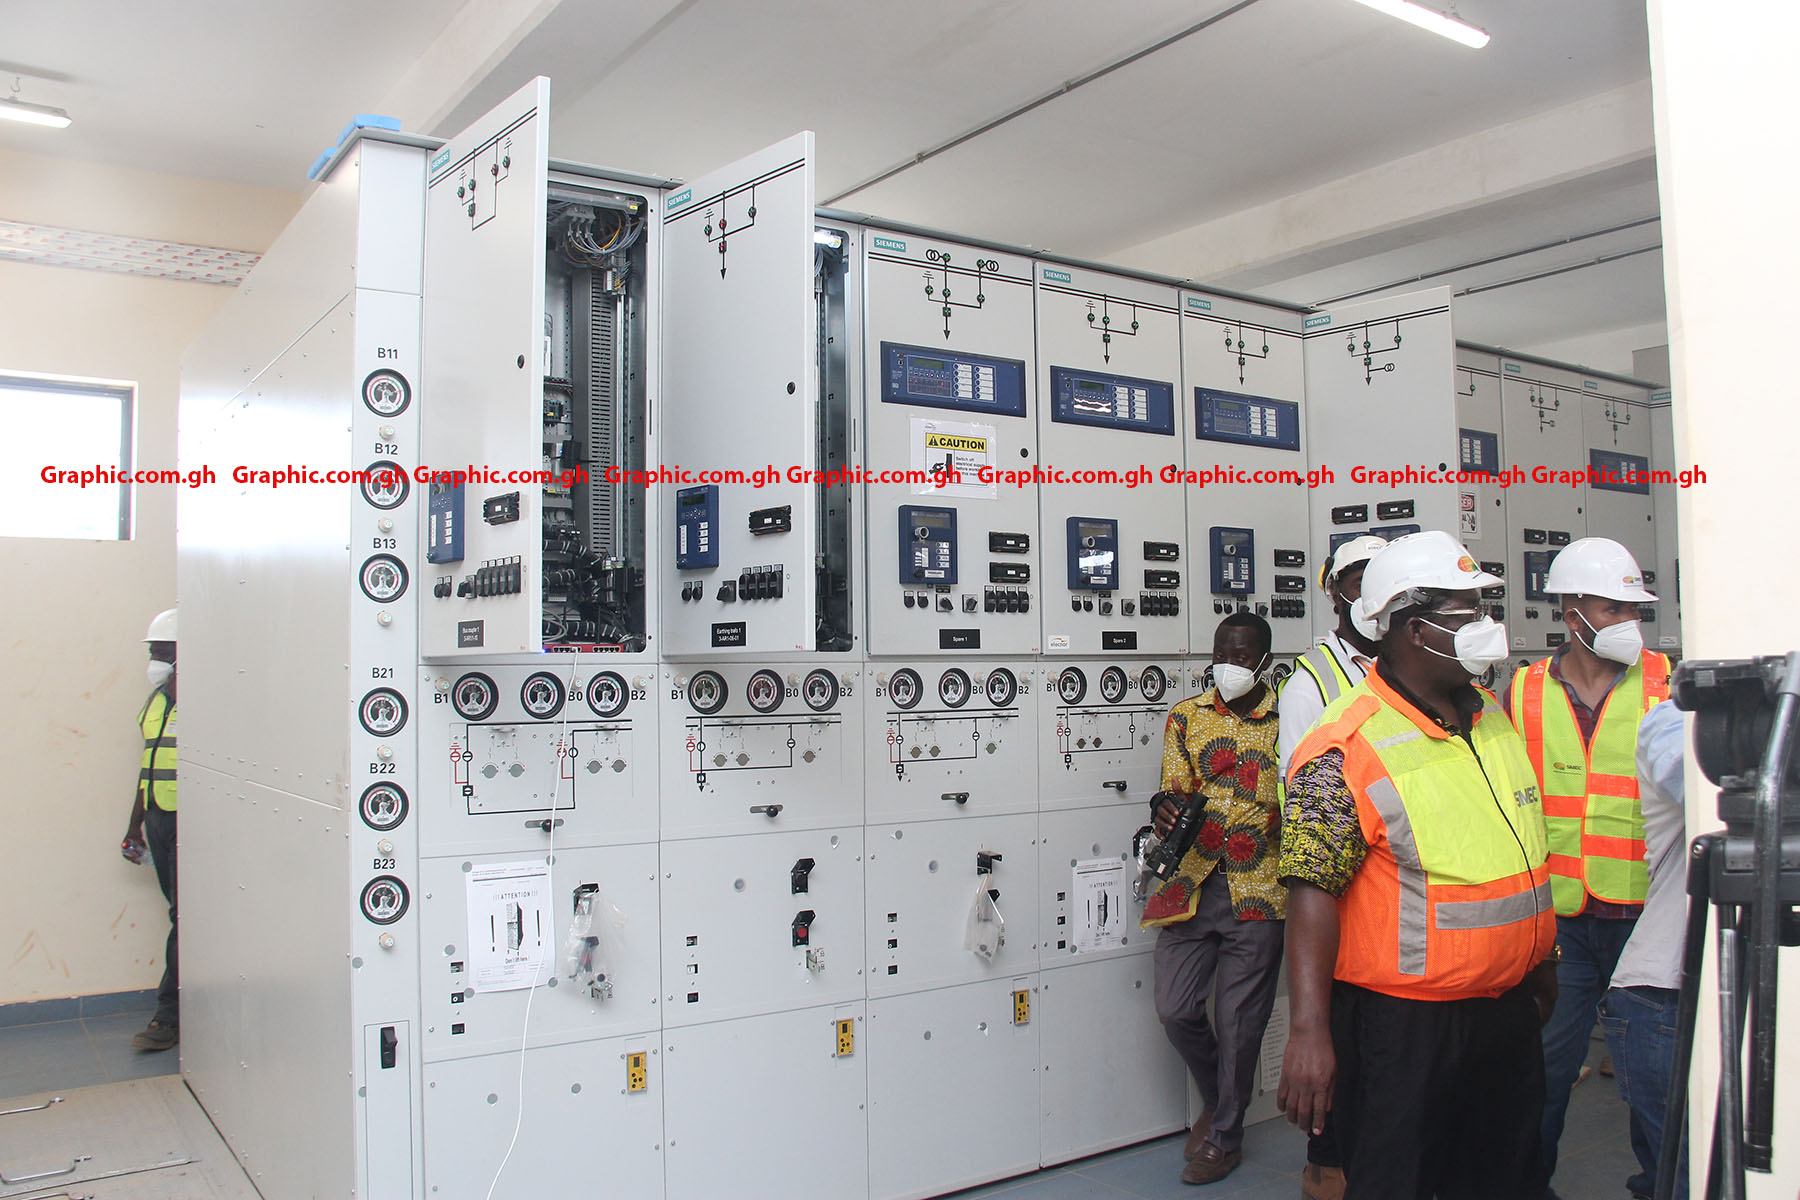 The Minister of Energy, Dr Matthew Opoku Prempeh on Tuesday, April 20, 2021 inspected ongoing works at the Bulk Power Supply Point (BPS) being constructed at Pokuase which is 95 per cent complete and on schedule for handover to the government at the end of July 2021.